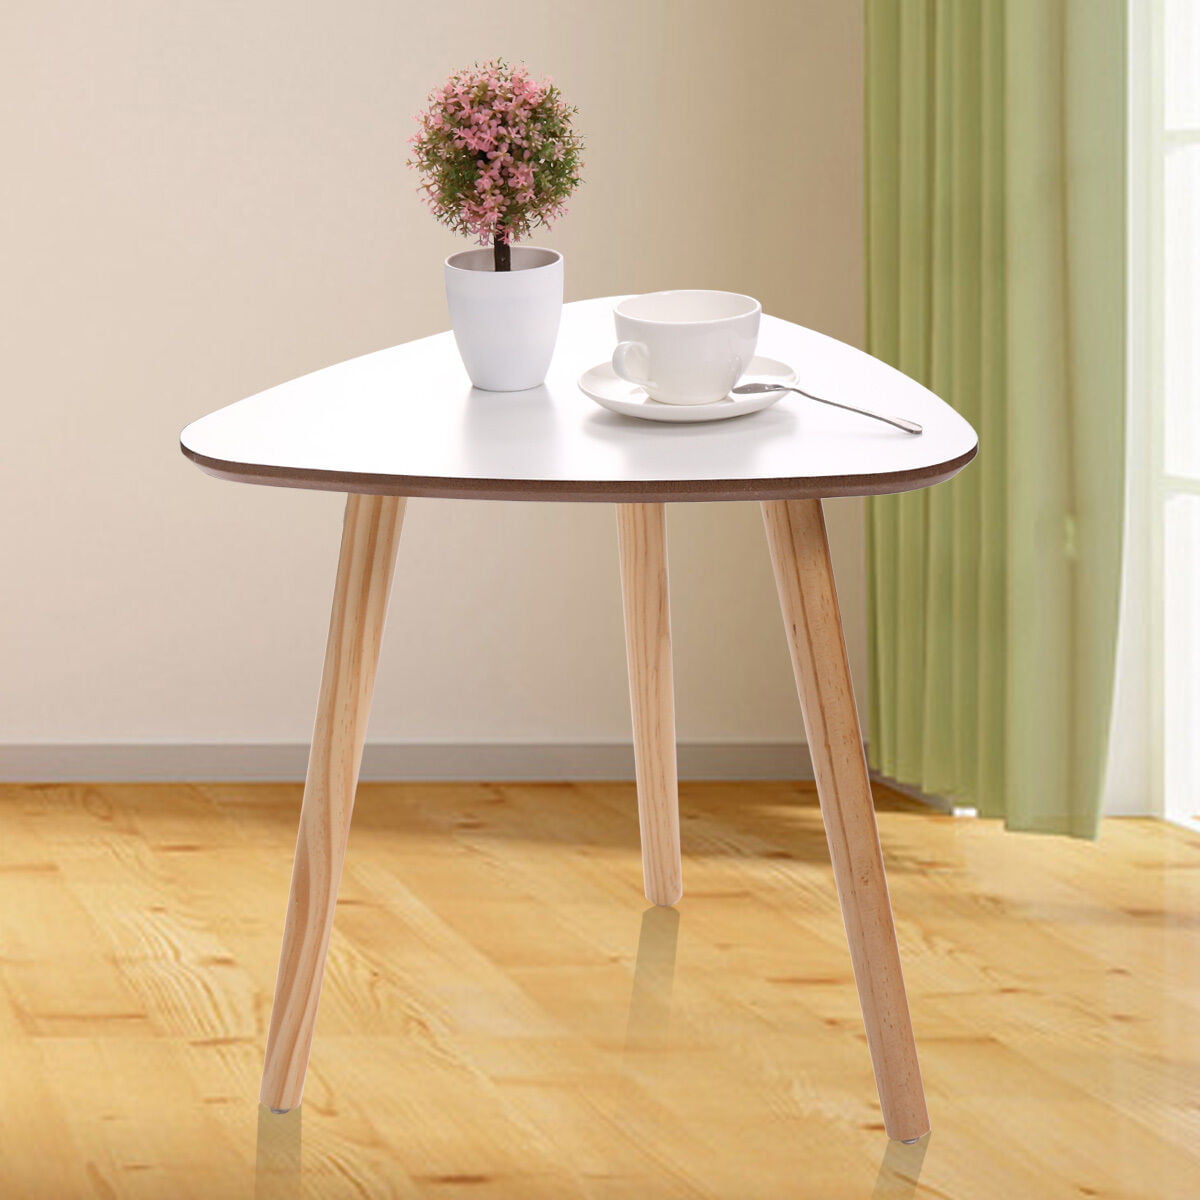 Topcobe End Table, Side Table for Bedroom, Living Room, Dining Room